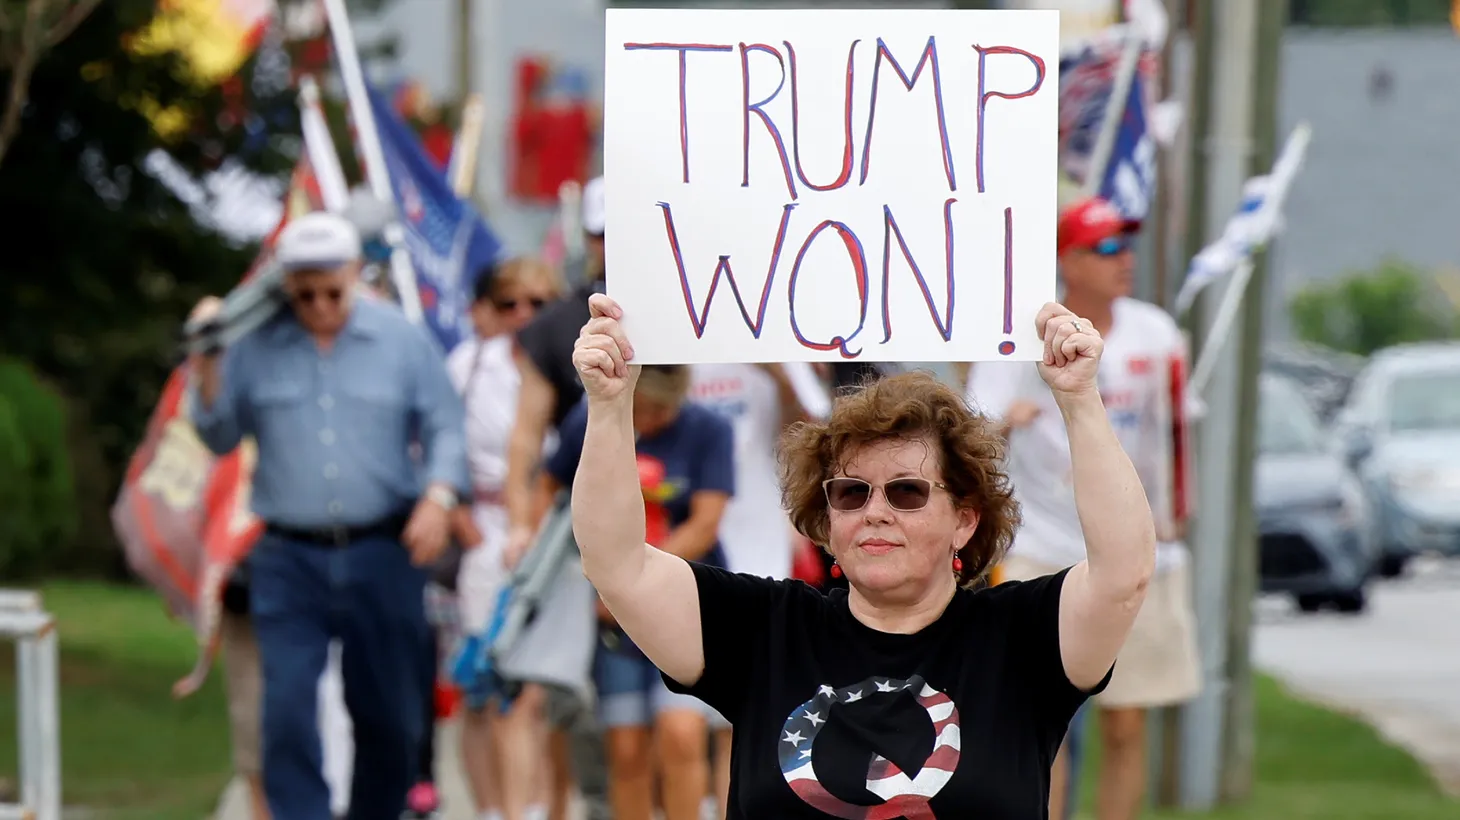 A supporter of former U.S. President Donald Trump wears a QAnon shirt while holding a sign stating he won the 2020 election, outside the North Carolina GOP convention in Greenville, North Carolina, June 5, 2021.